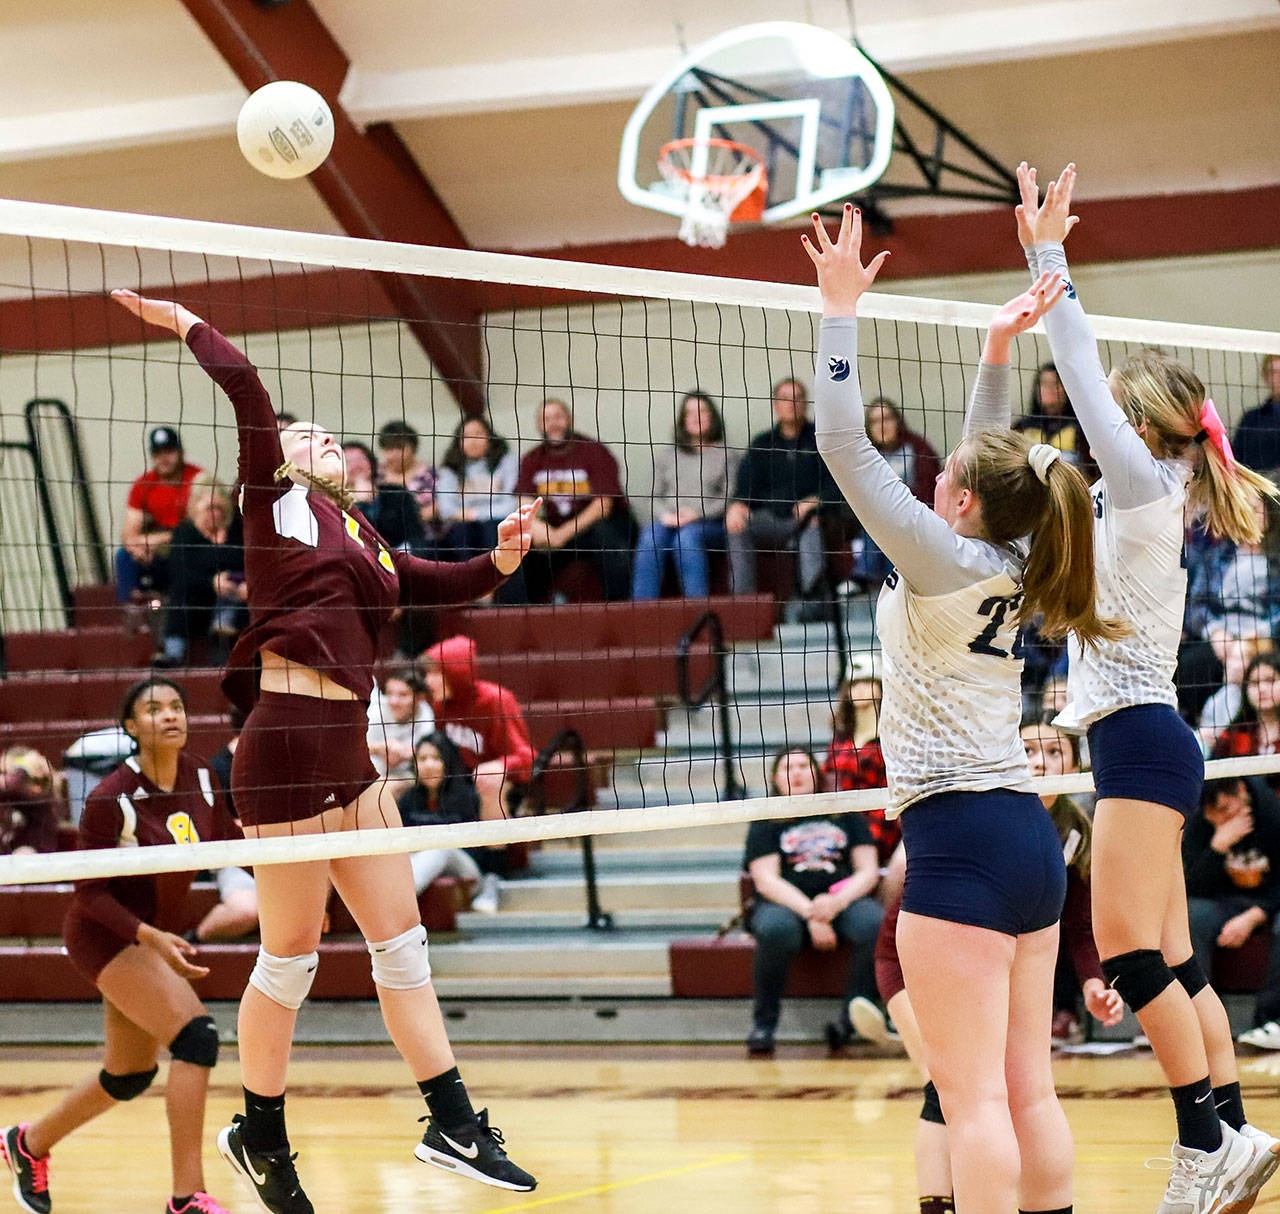 South Bend’s Reece Williams, left, goes up for a kill against the Pe Ell defense in the Indians’ straight-set win on Monday at South Bend High School. (Photo by Larry Bale)